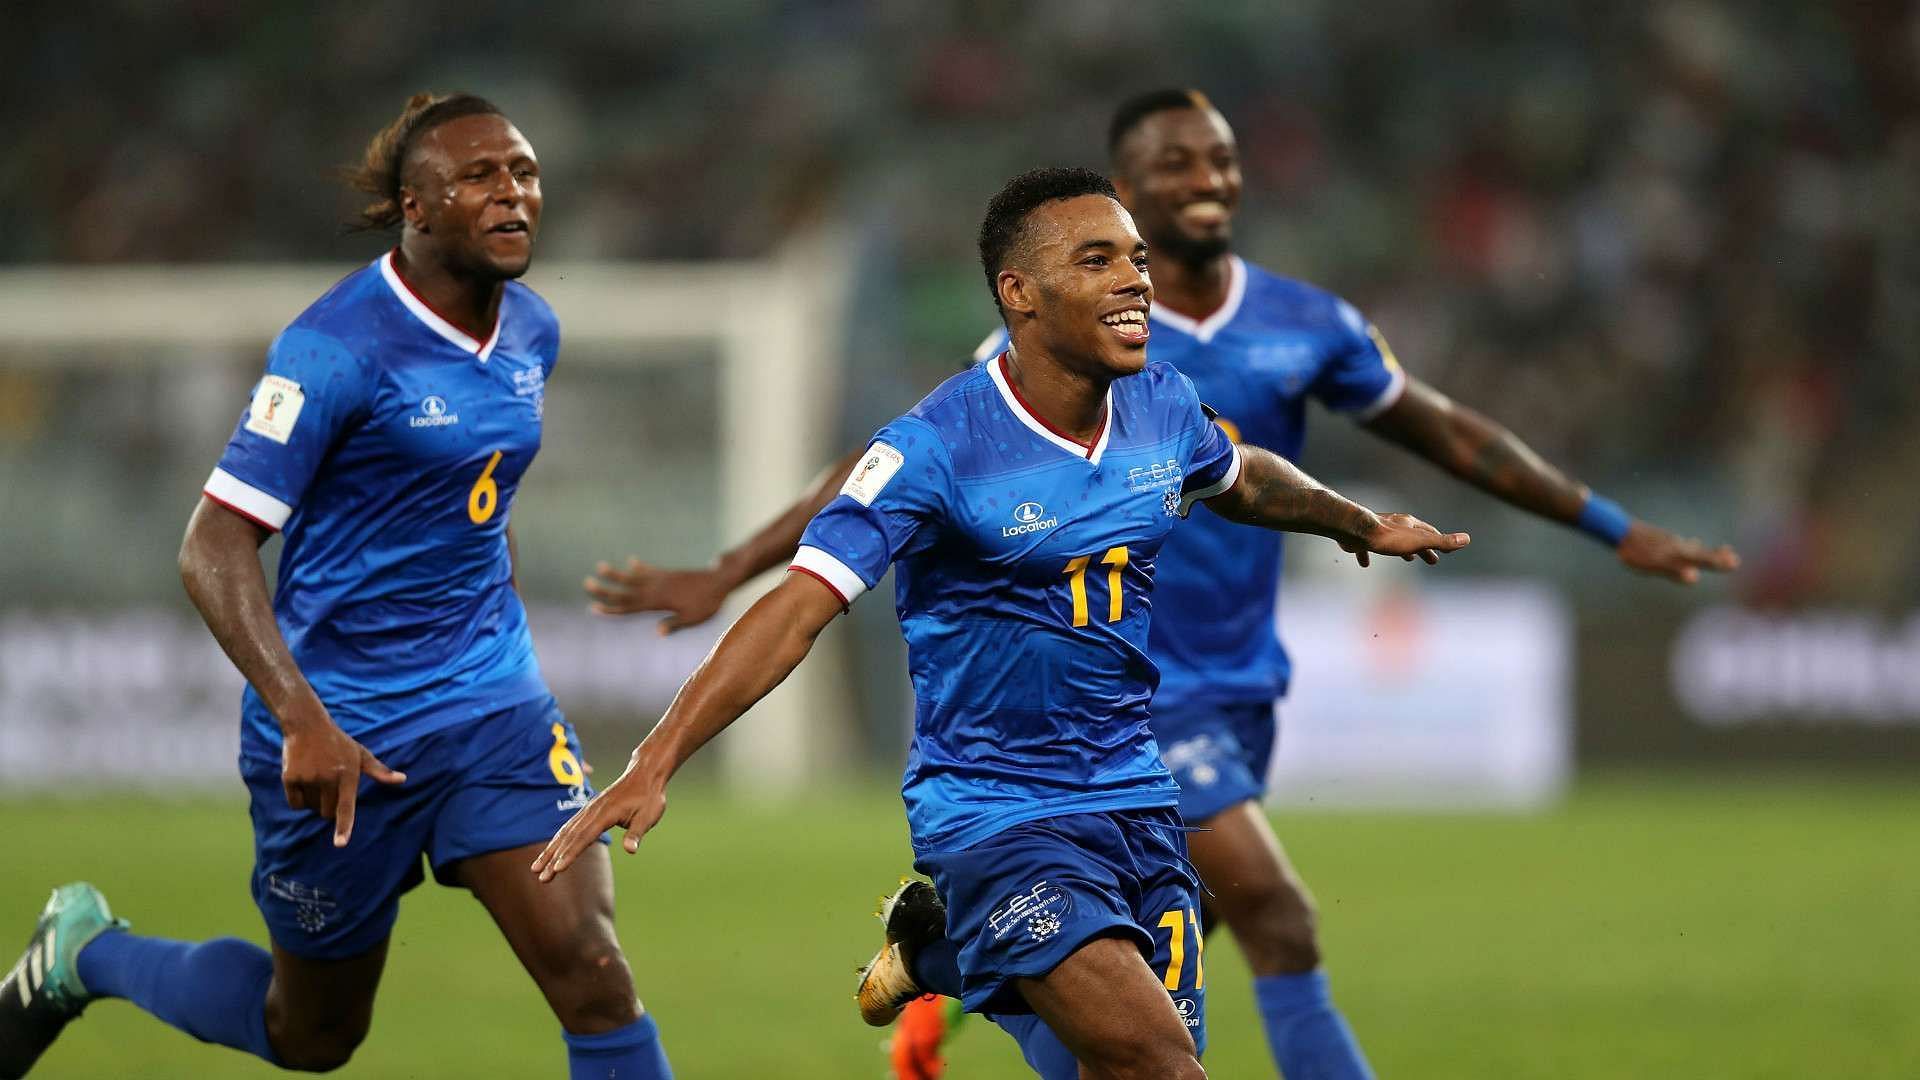 Ethiopia face Cape Verde in their opening fixture of AFCON 2021 on Sunday